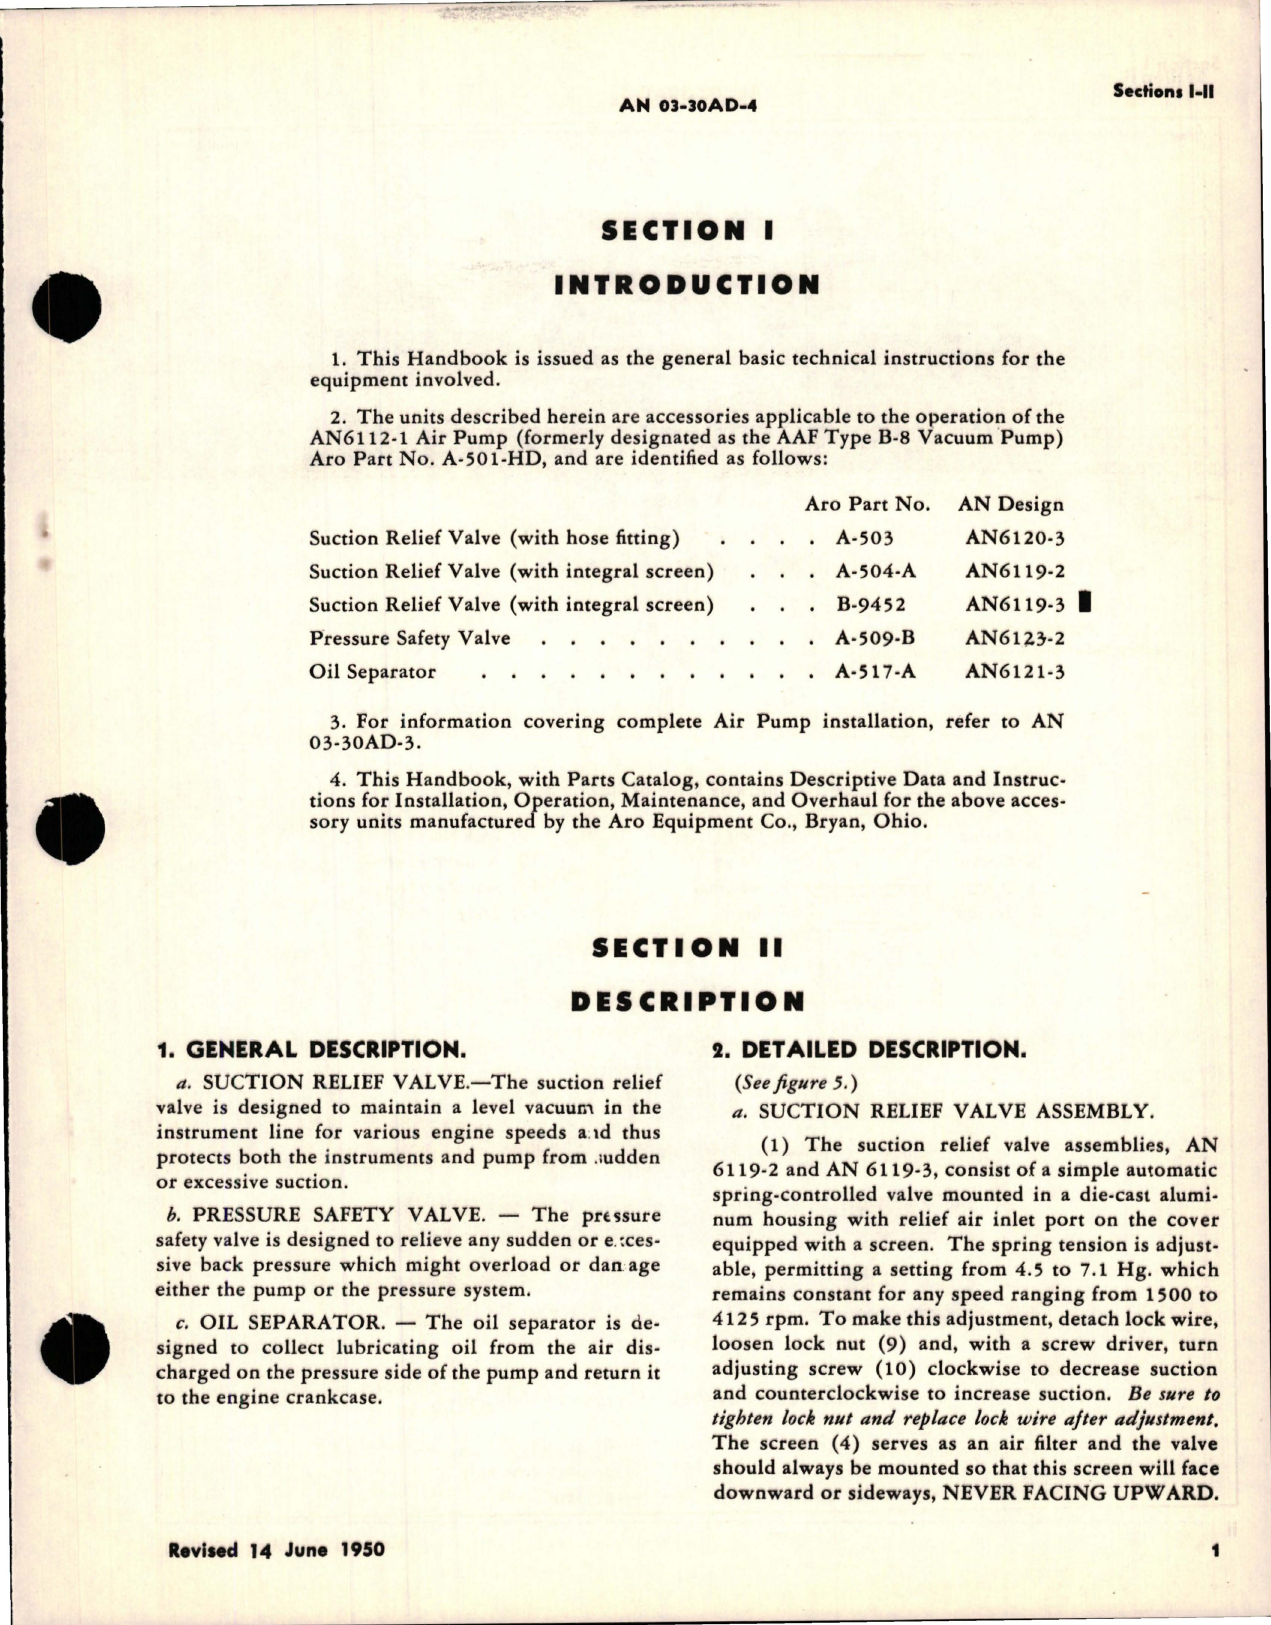 Sample page 5 from AirCorps Library document: Operation, Service and Overhaul Instructions with Parts Catalog for Relief Valves, Safety Valve Oil Separator 